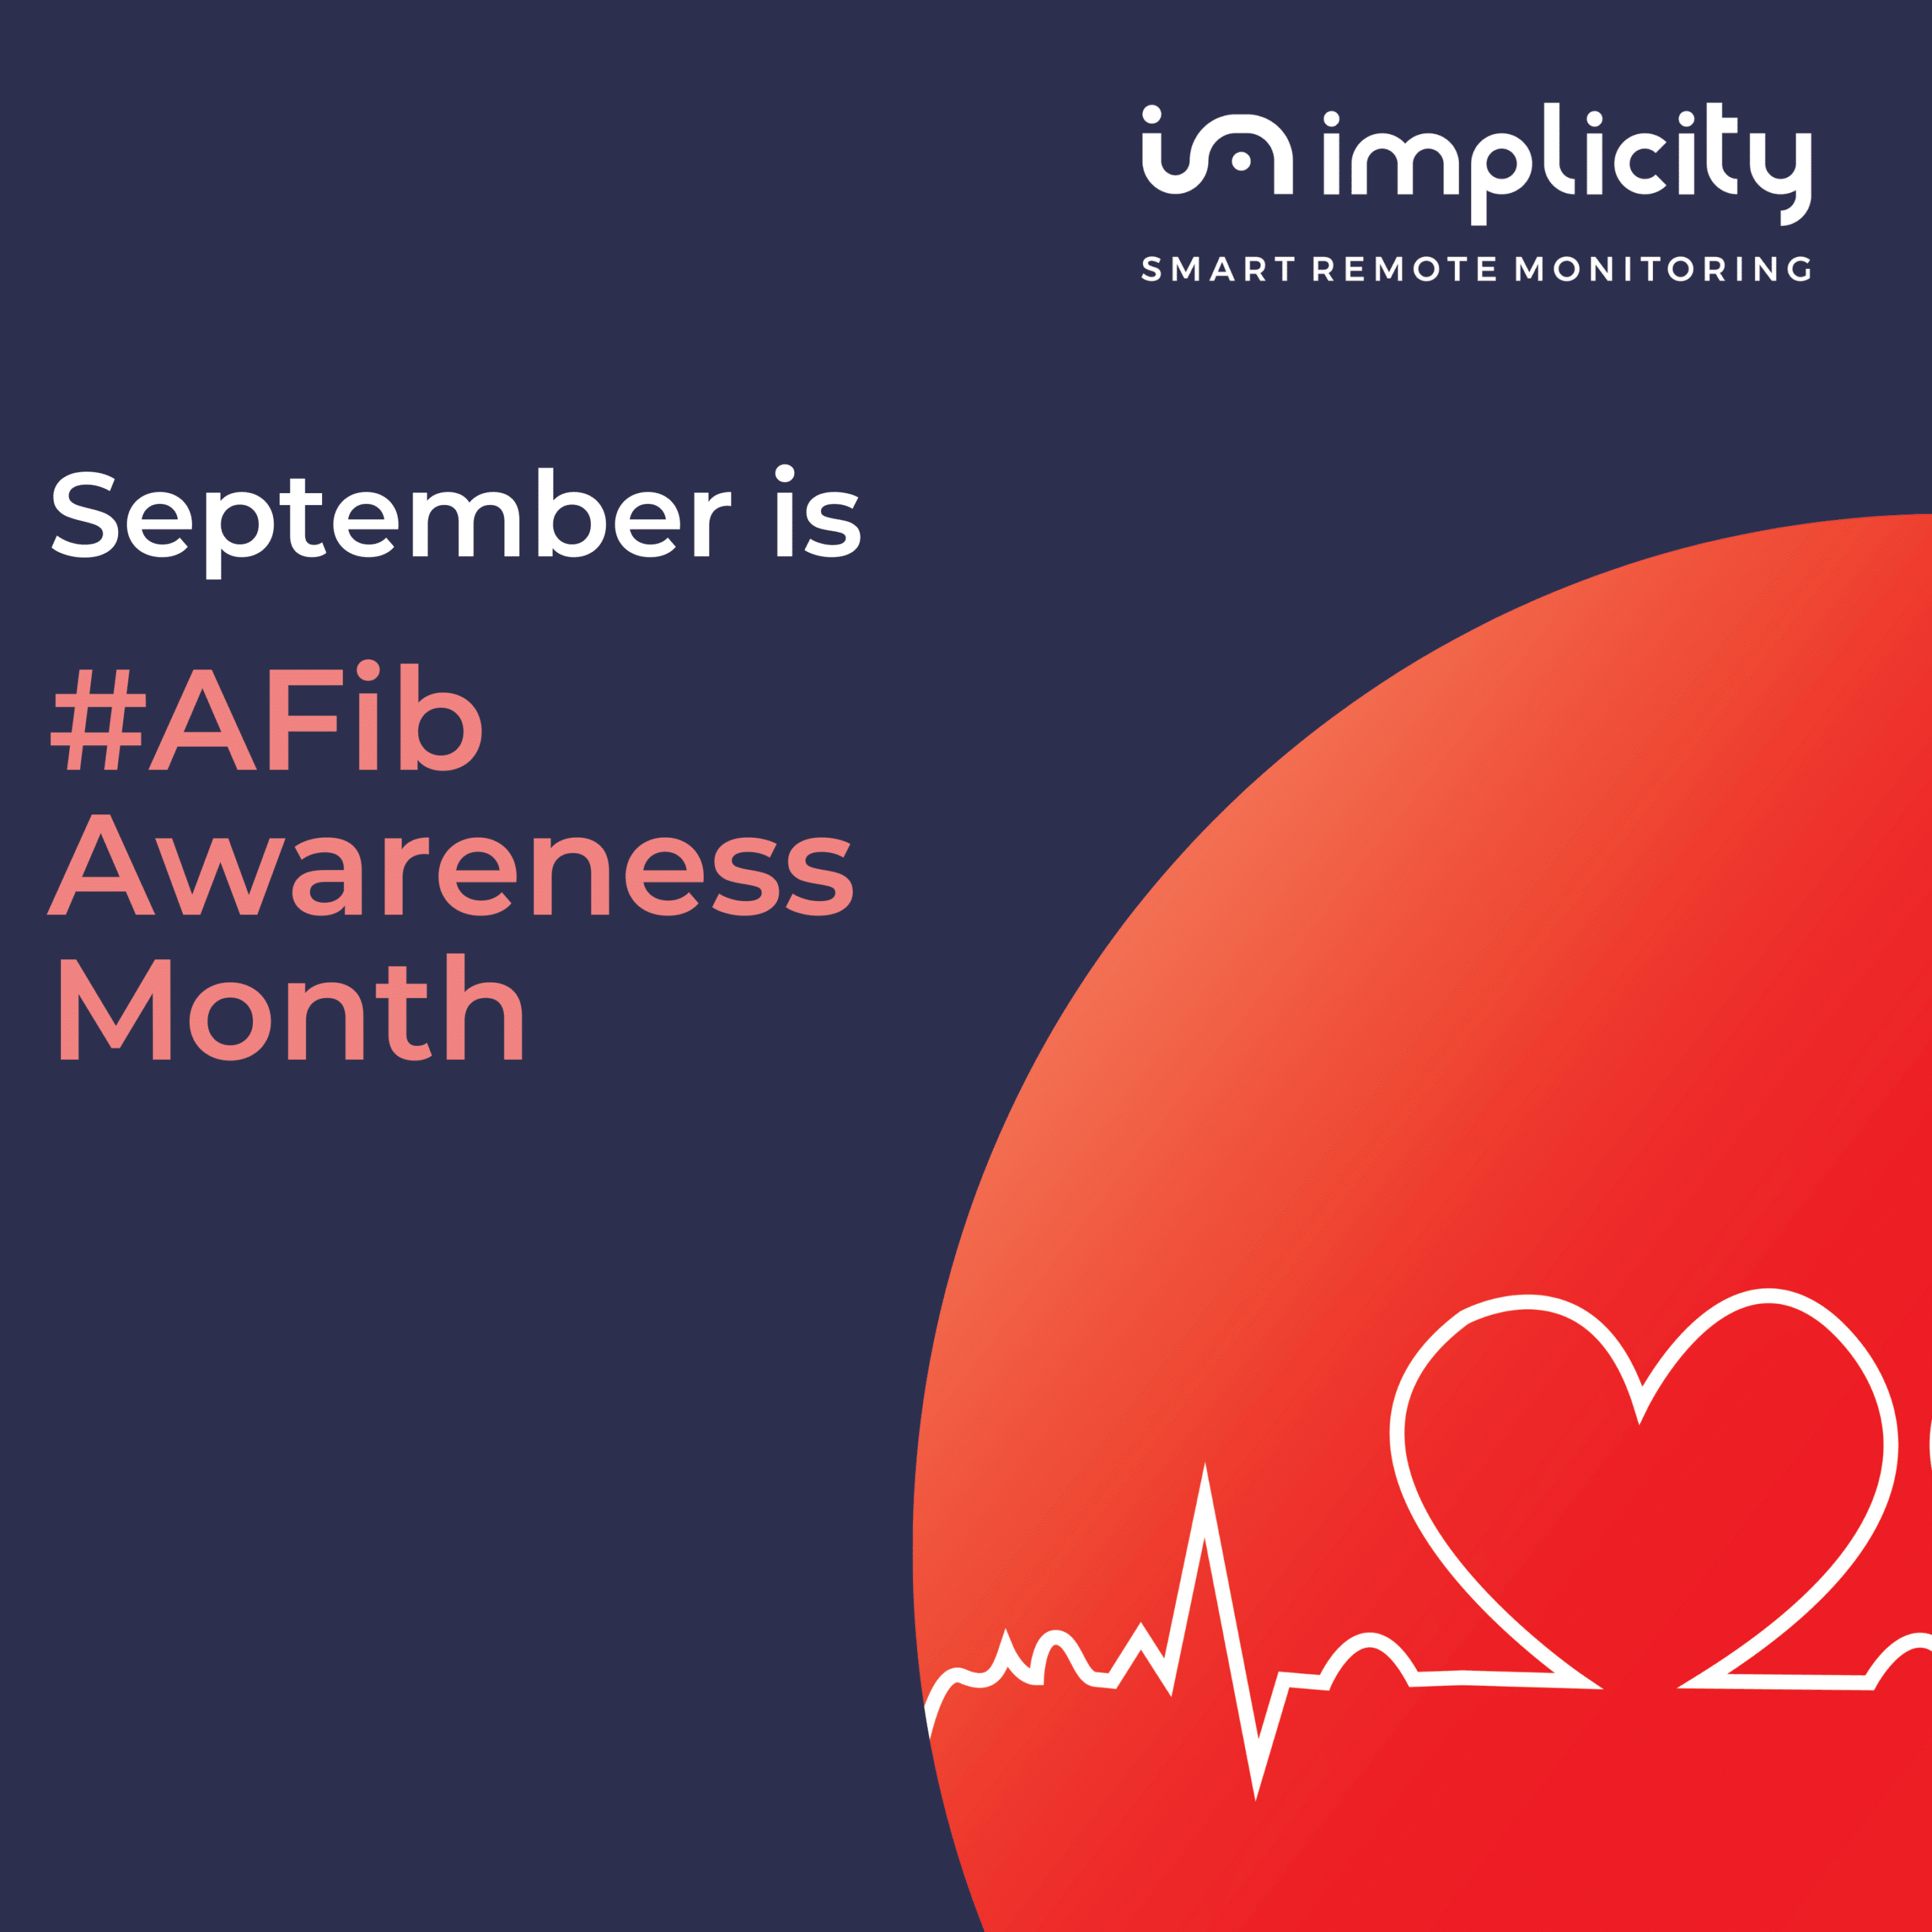 September is the AFib Awareness Month Implicity